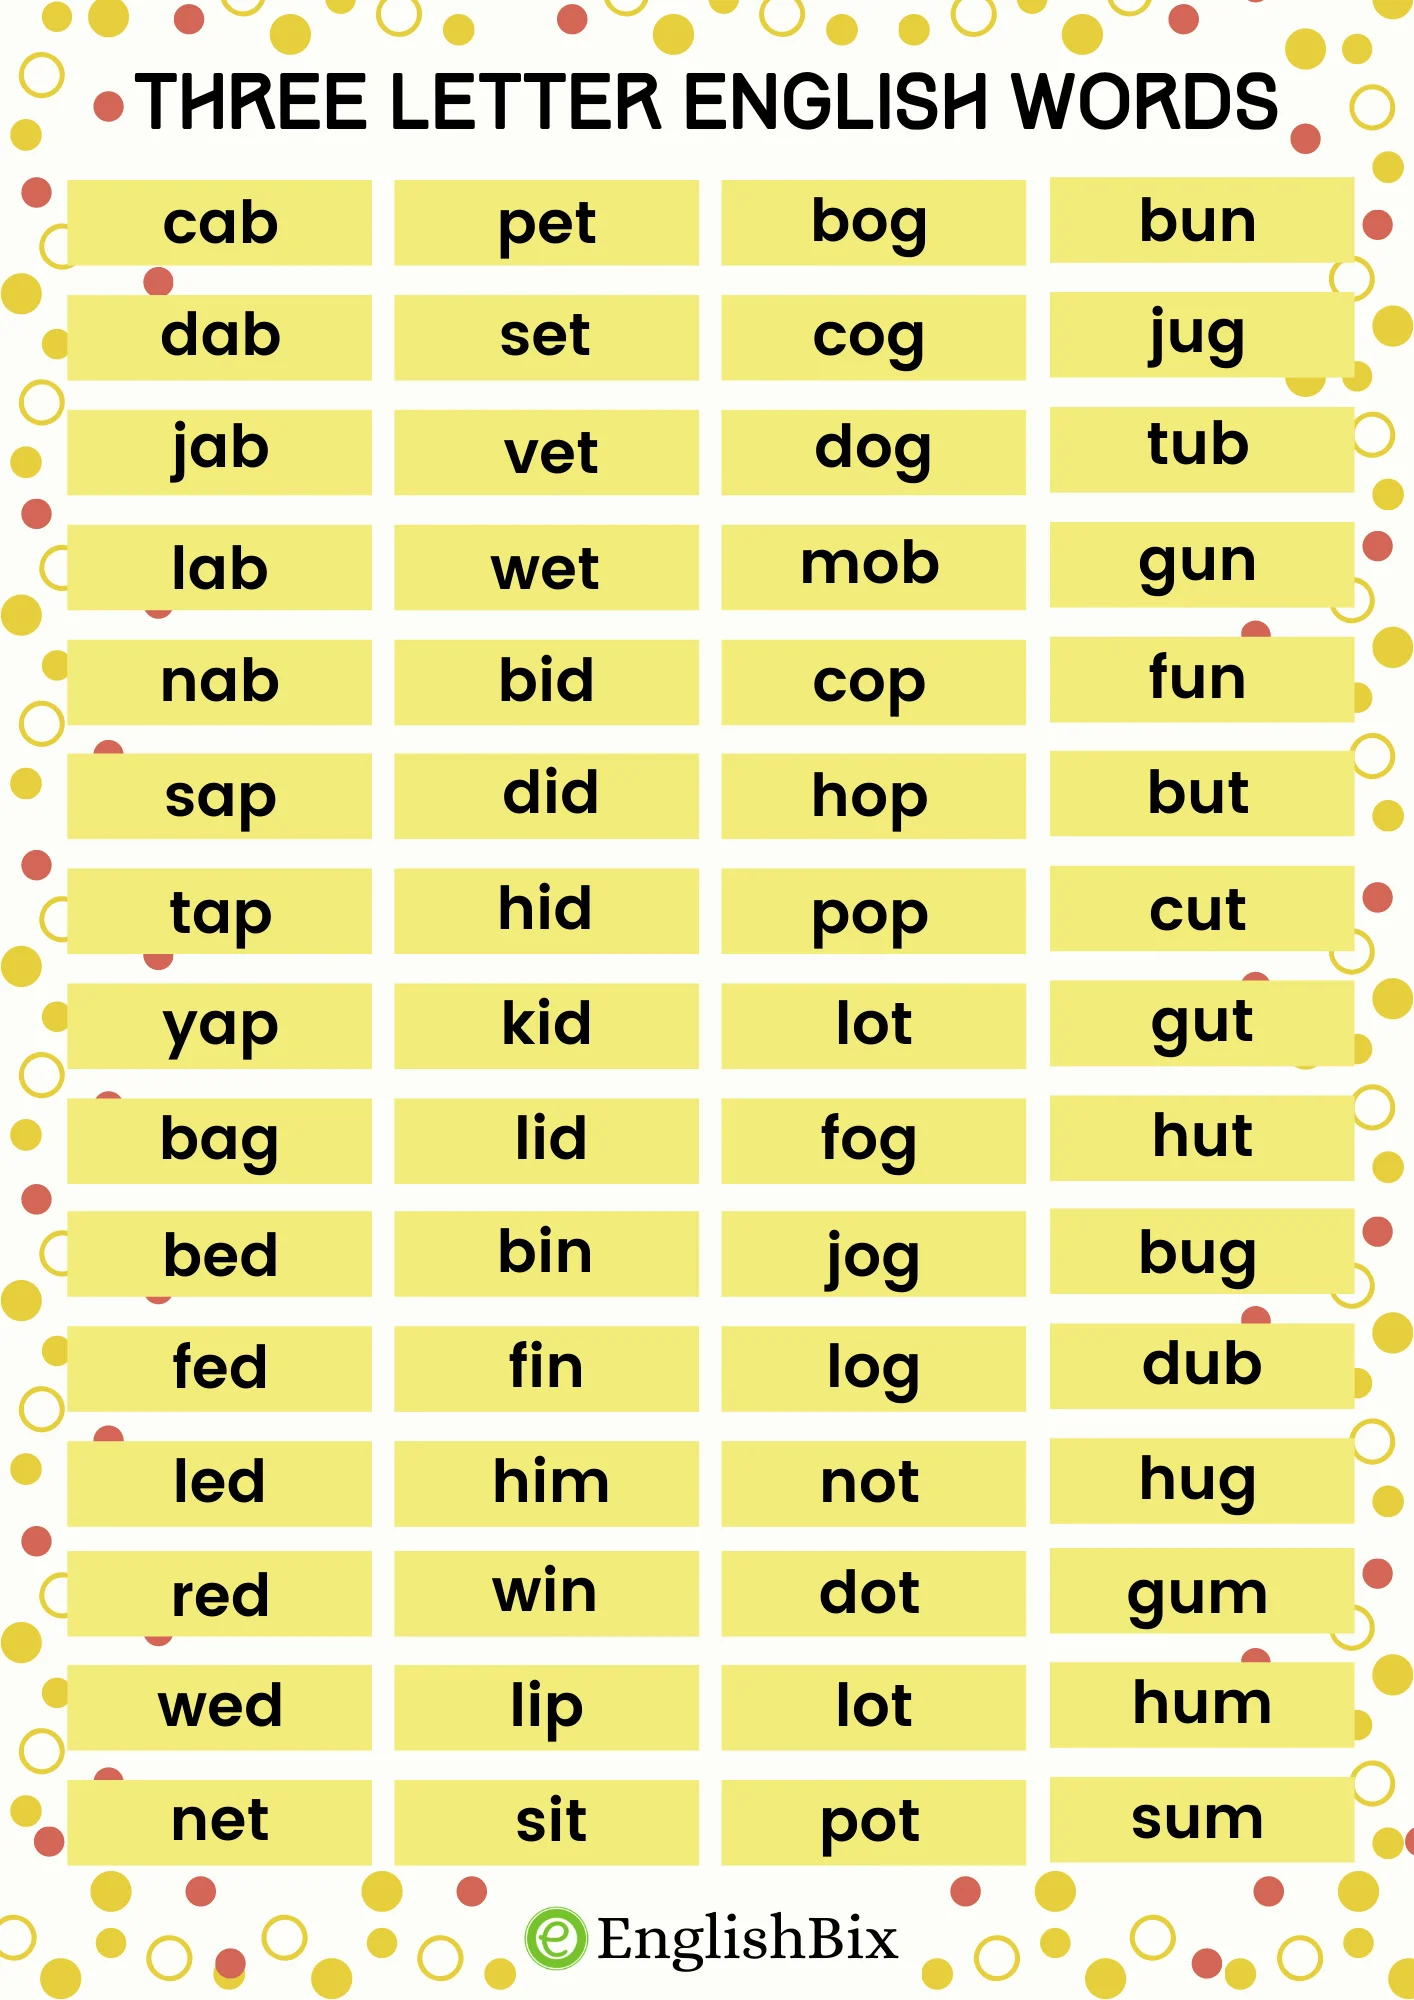 100+ Three Letter English Words For Kids - A To Z - Englishbix